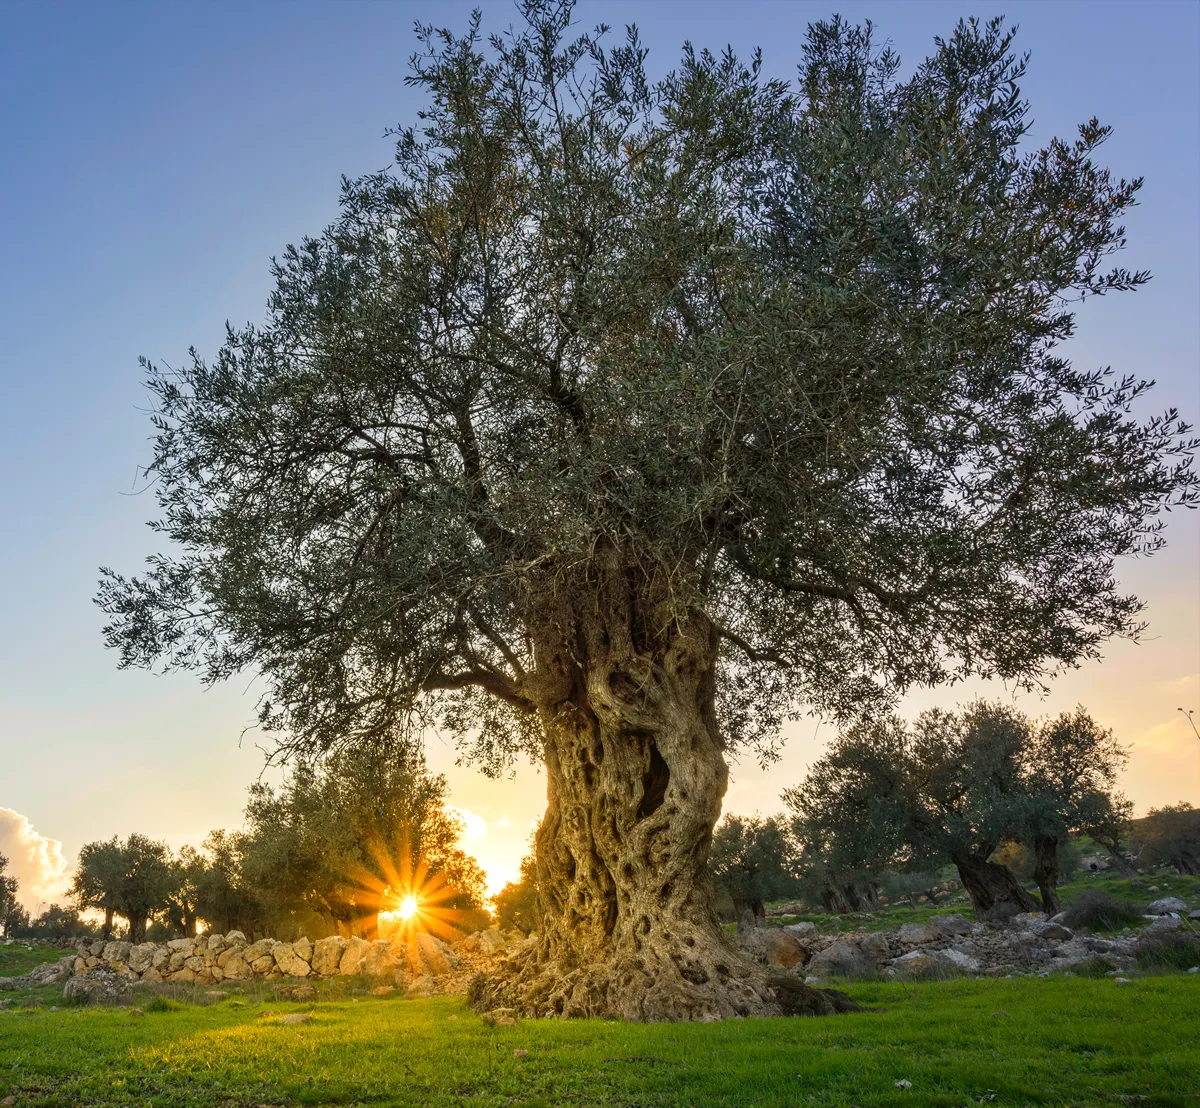 Olive tree with sunburst in the background, grown by monks of Mar Elias Monastery for olive oil, Jerusalem Israel